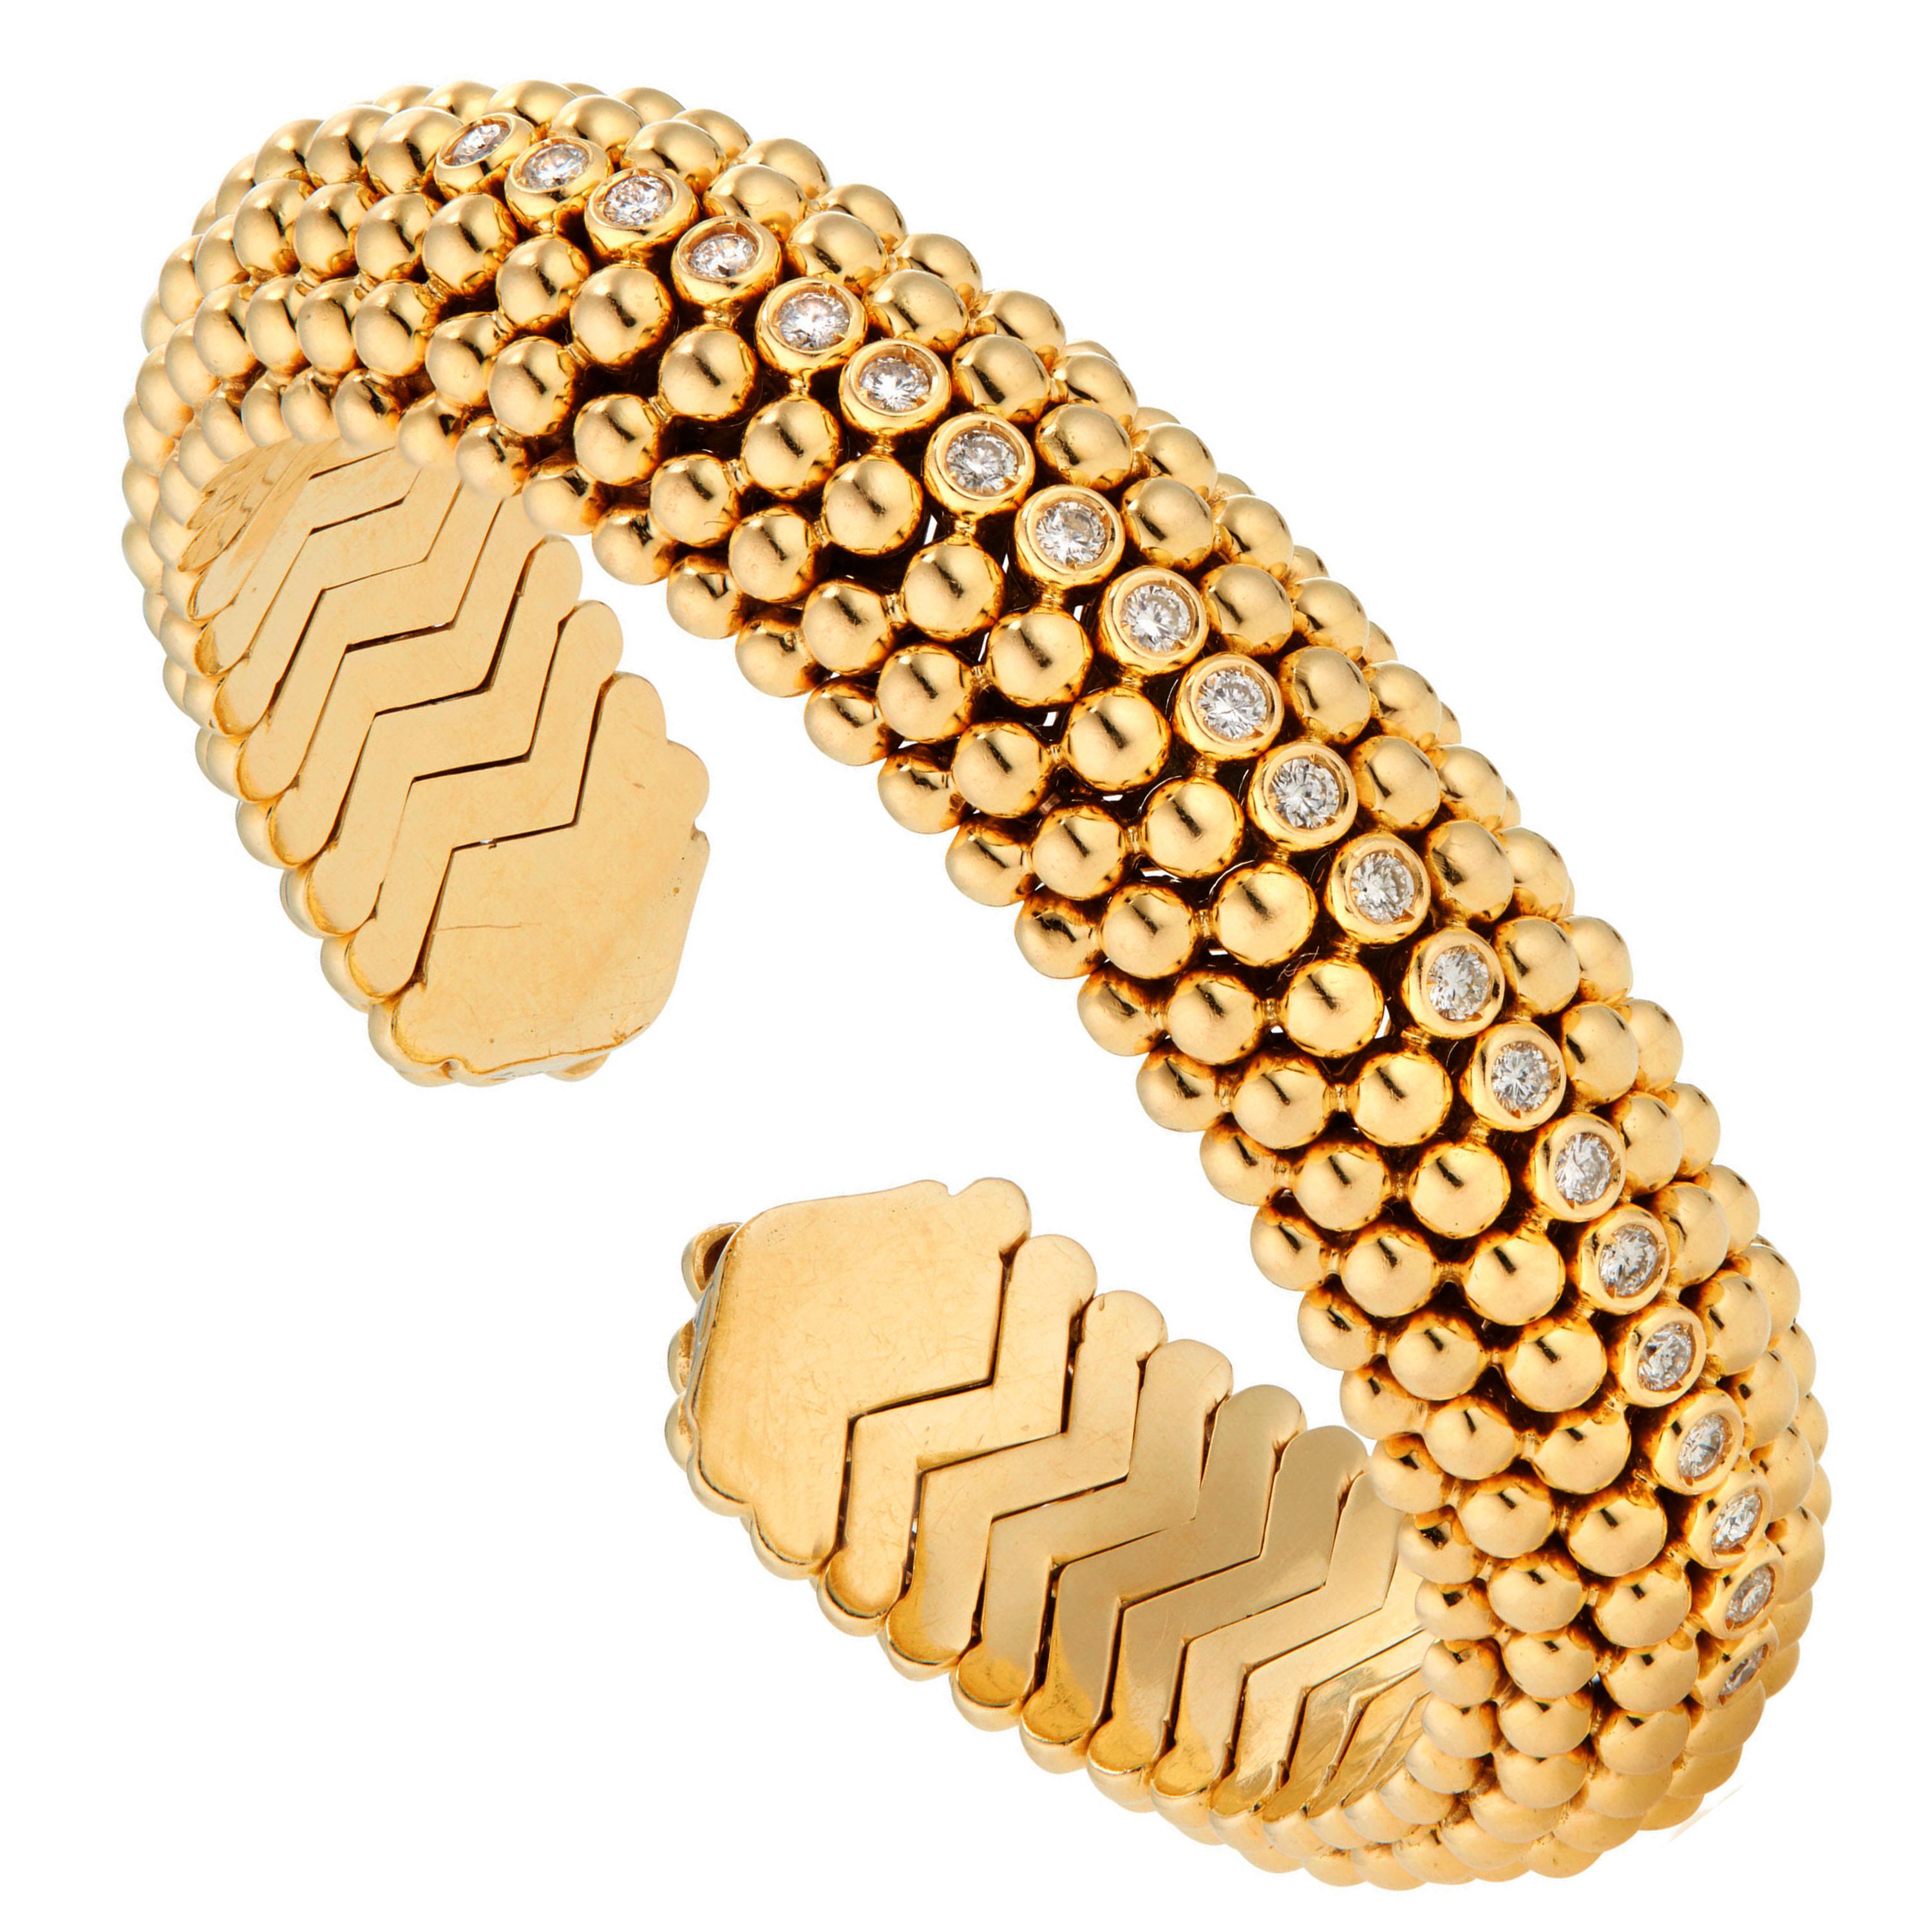 A vintage Bvlgari bracelet dating the Dolce Vita period of 1950s Rome, this bracelet is designed as a beaded mesh atop hand formed curved tubogas links in 18k yellow gold. The center row is adorned with the finest original Bvlgari round brilliant